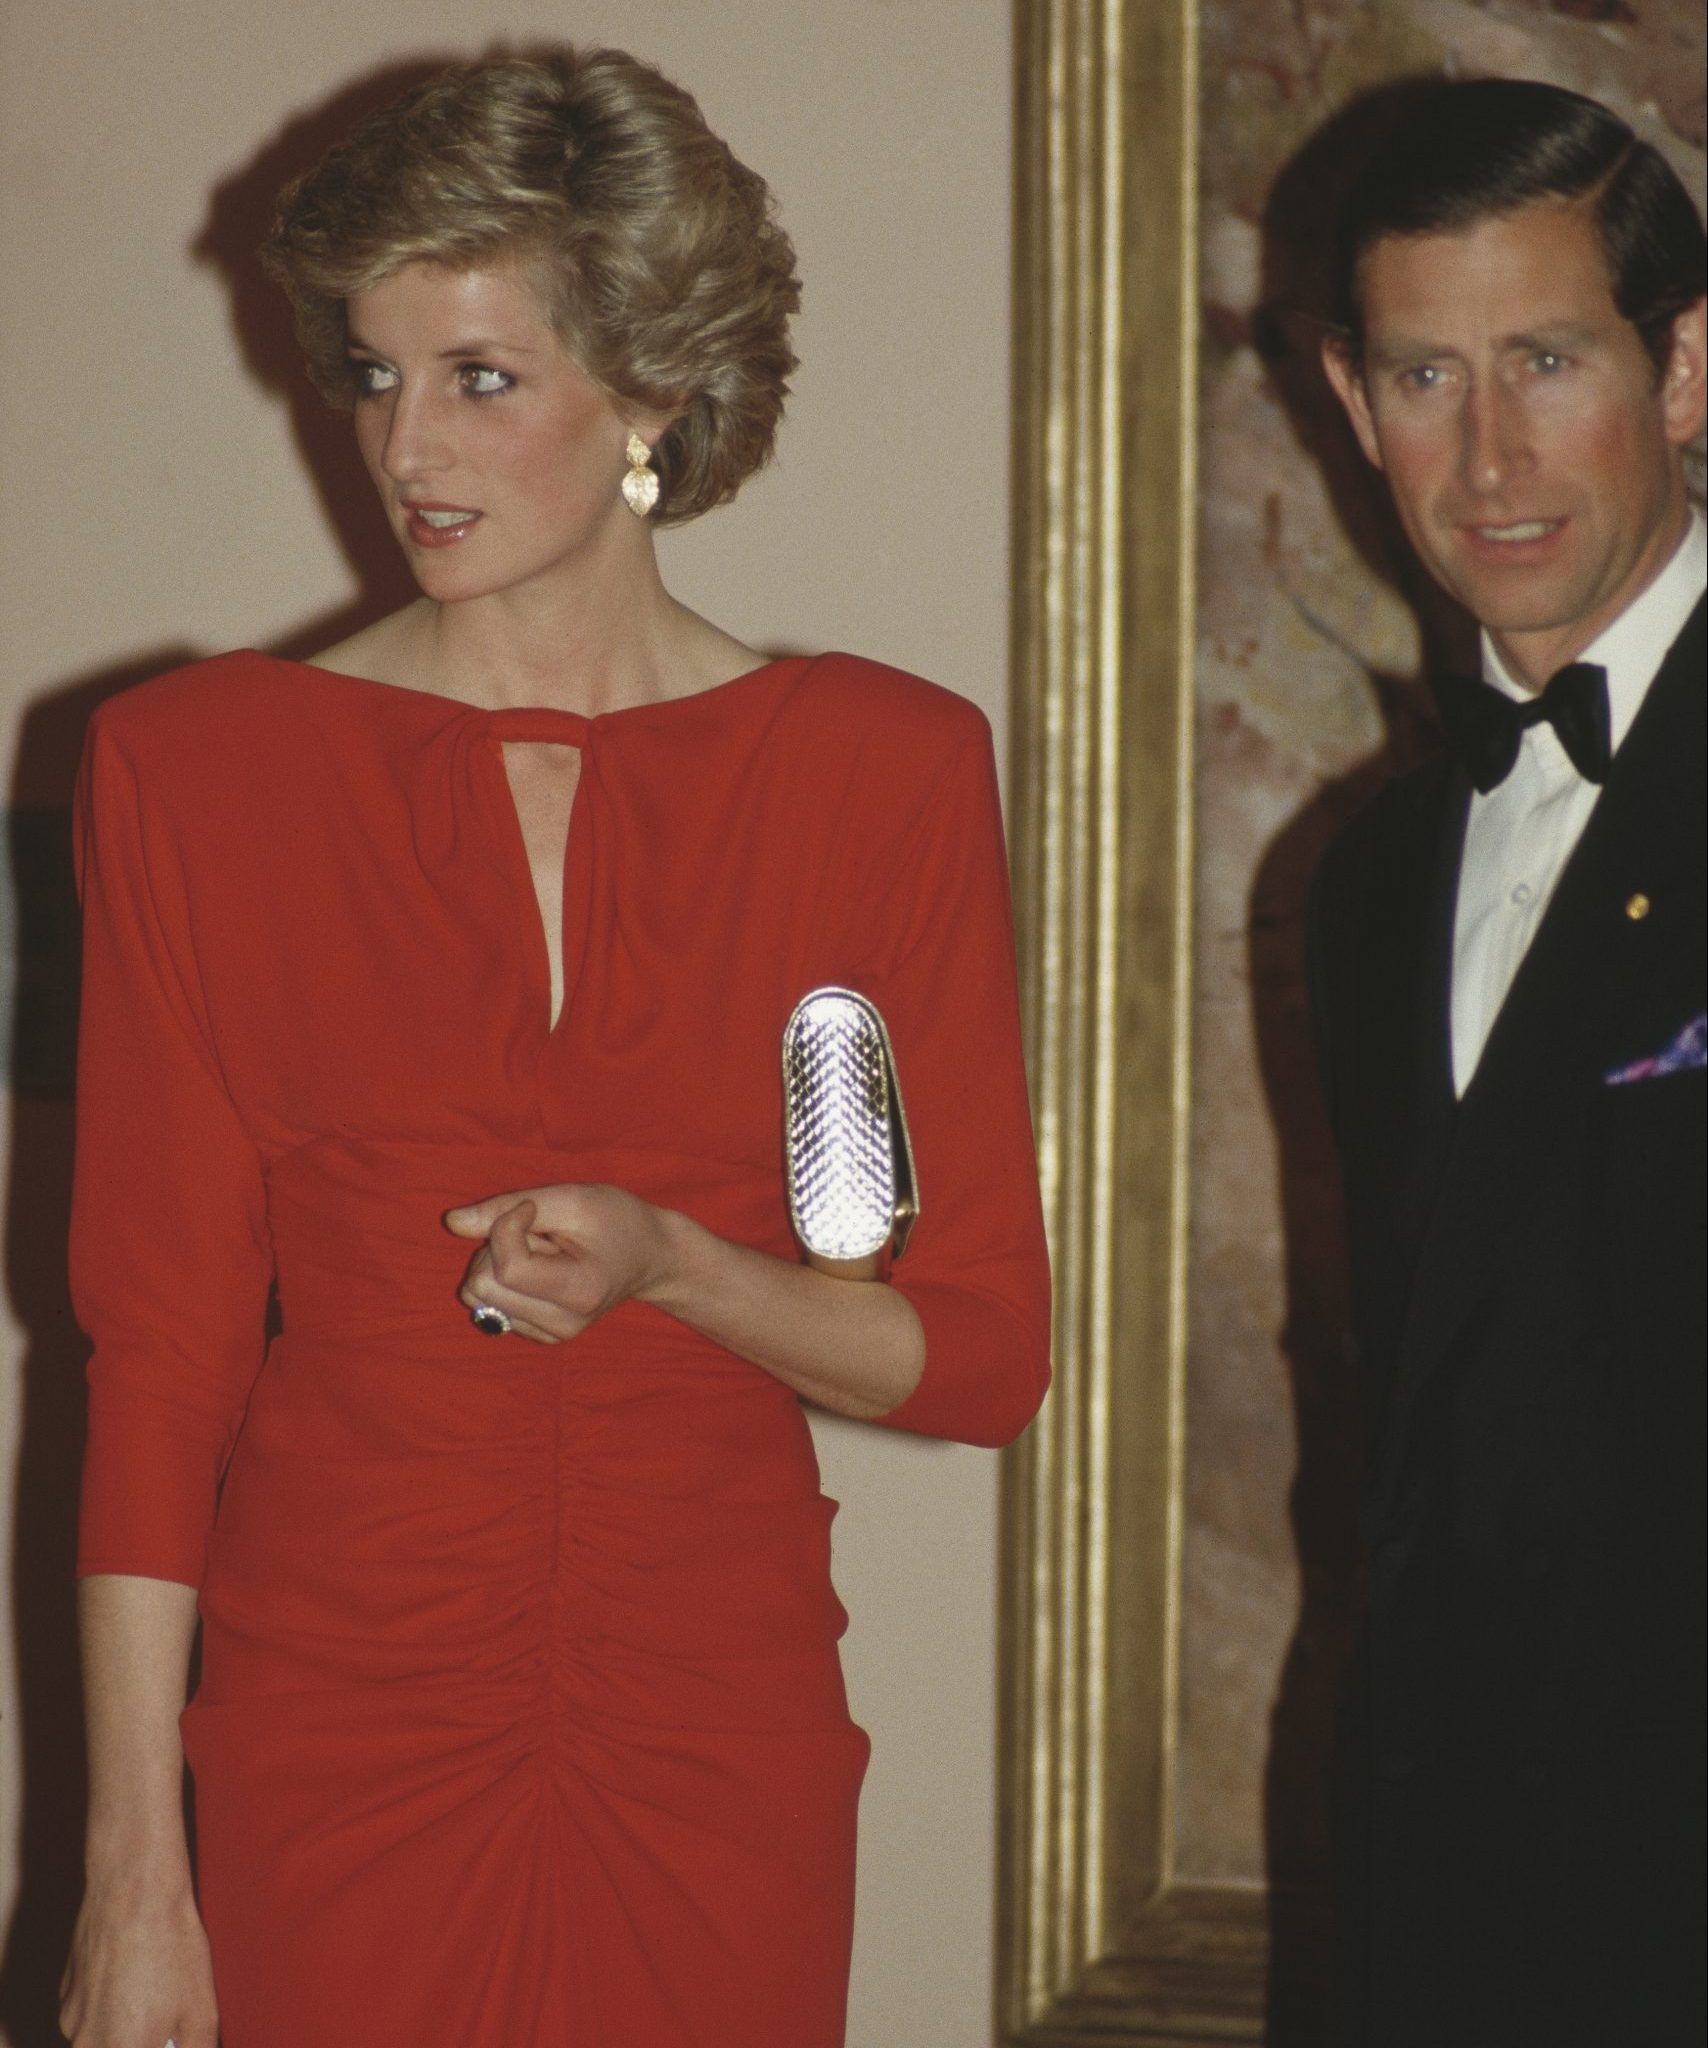 Prince Charles and Diana, Princess of Wales (1961 - 1997) attend a state reception in Melbourne, Australia, October 1988. 